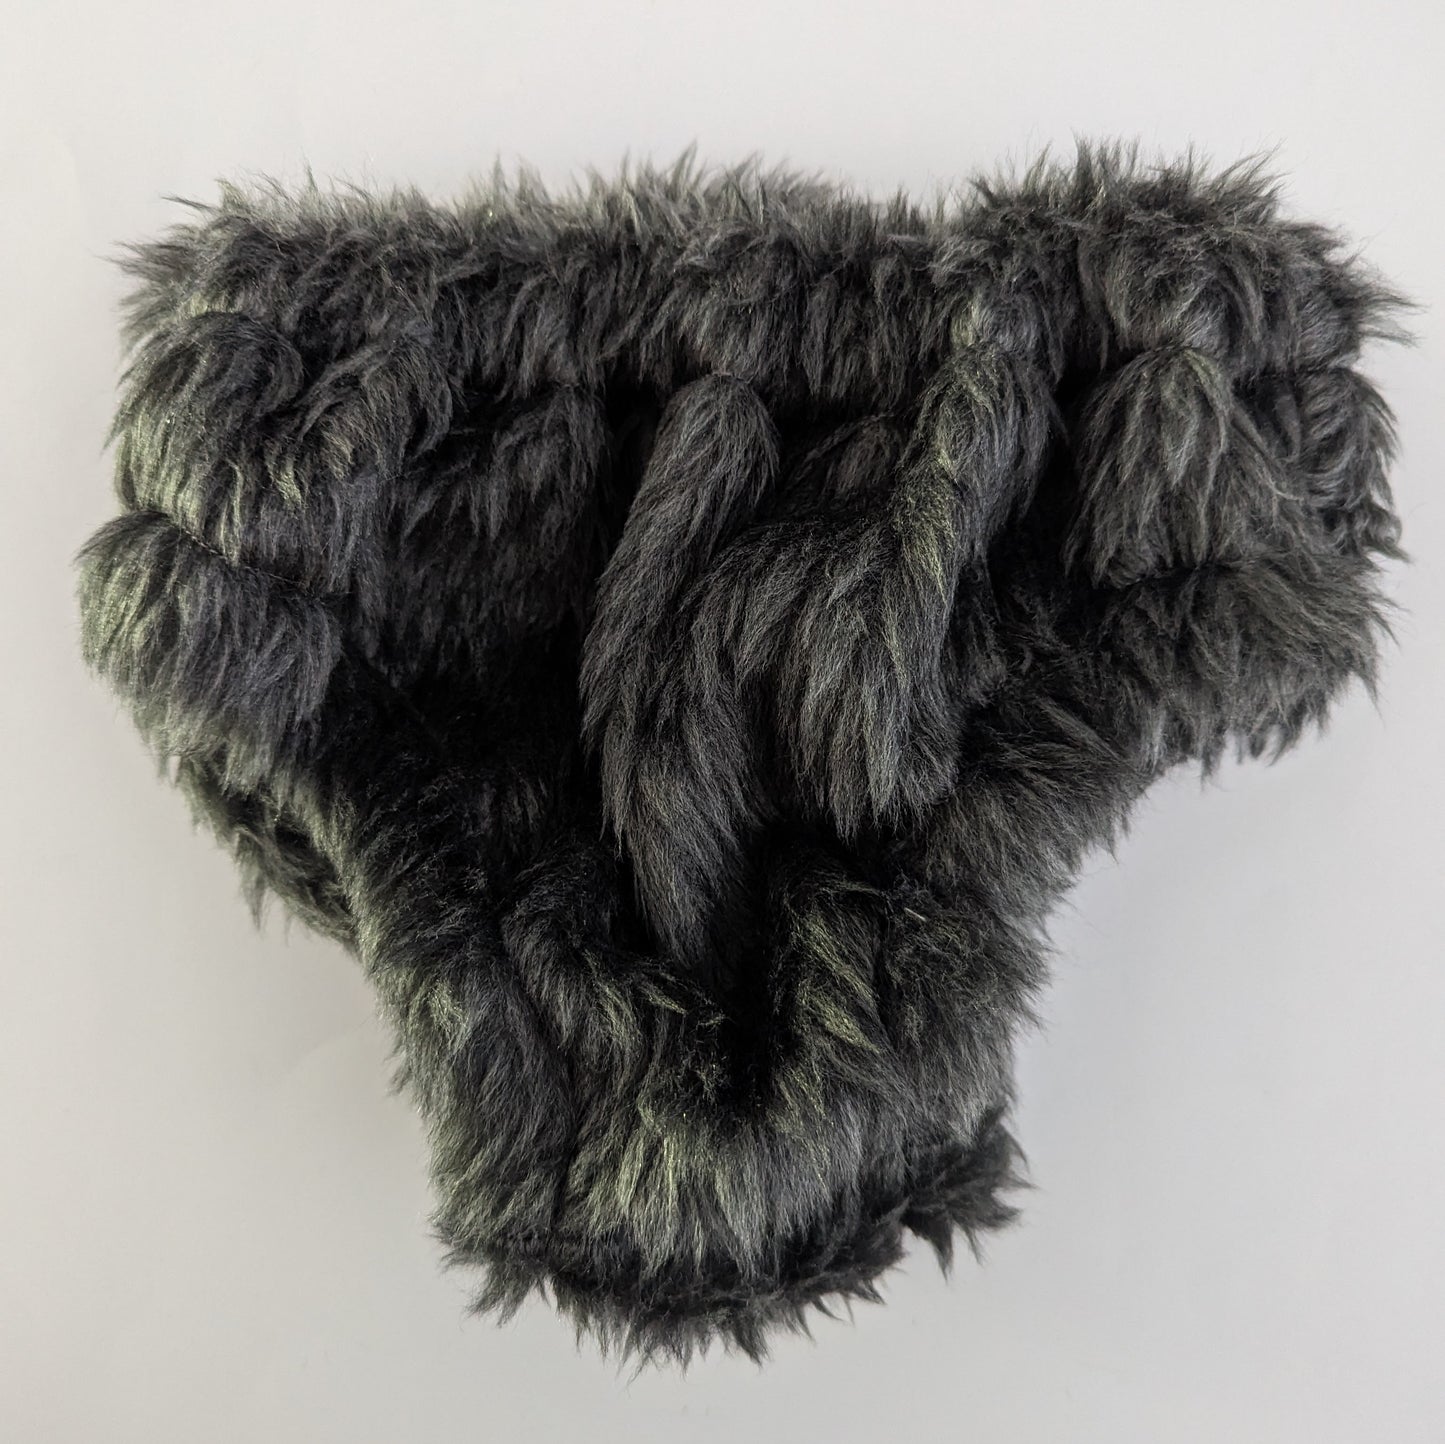 FAUX FUR - DARK GREY - Fake Animal Hair Baby Nappy Cover, Size 1 (12-24 months)